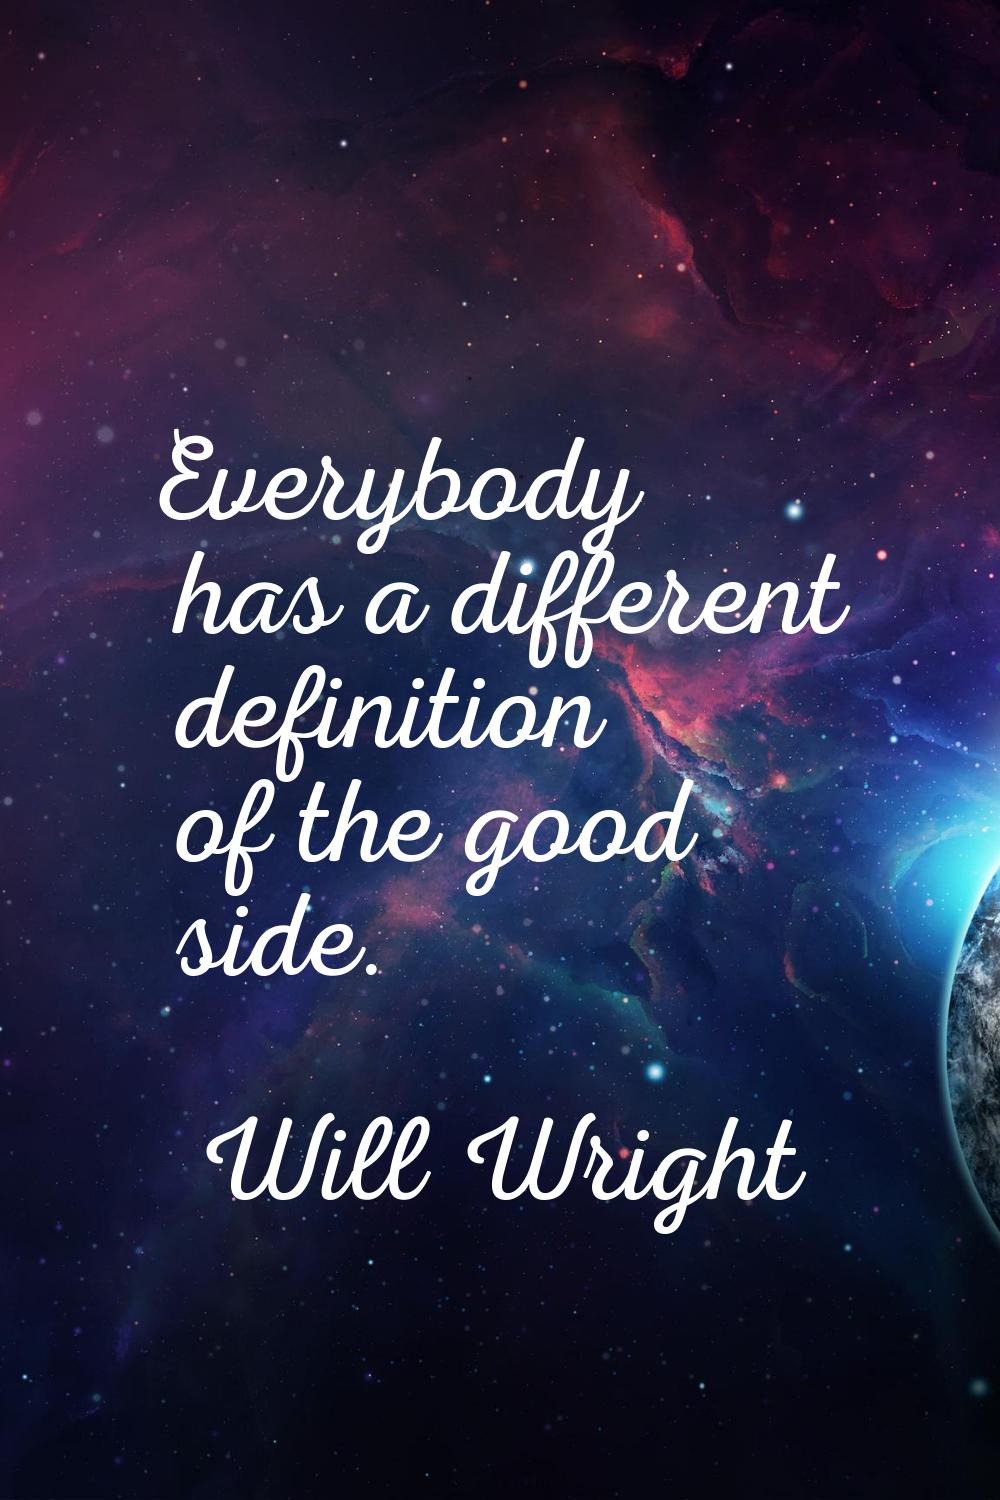 Everybody has a different definition of the good side.